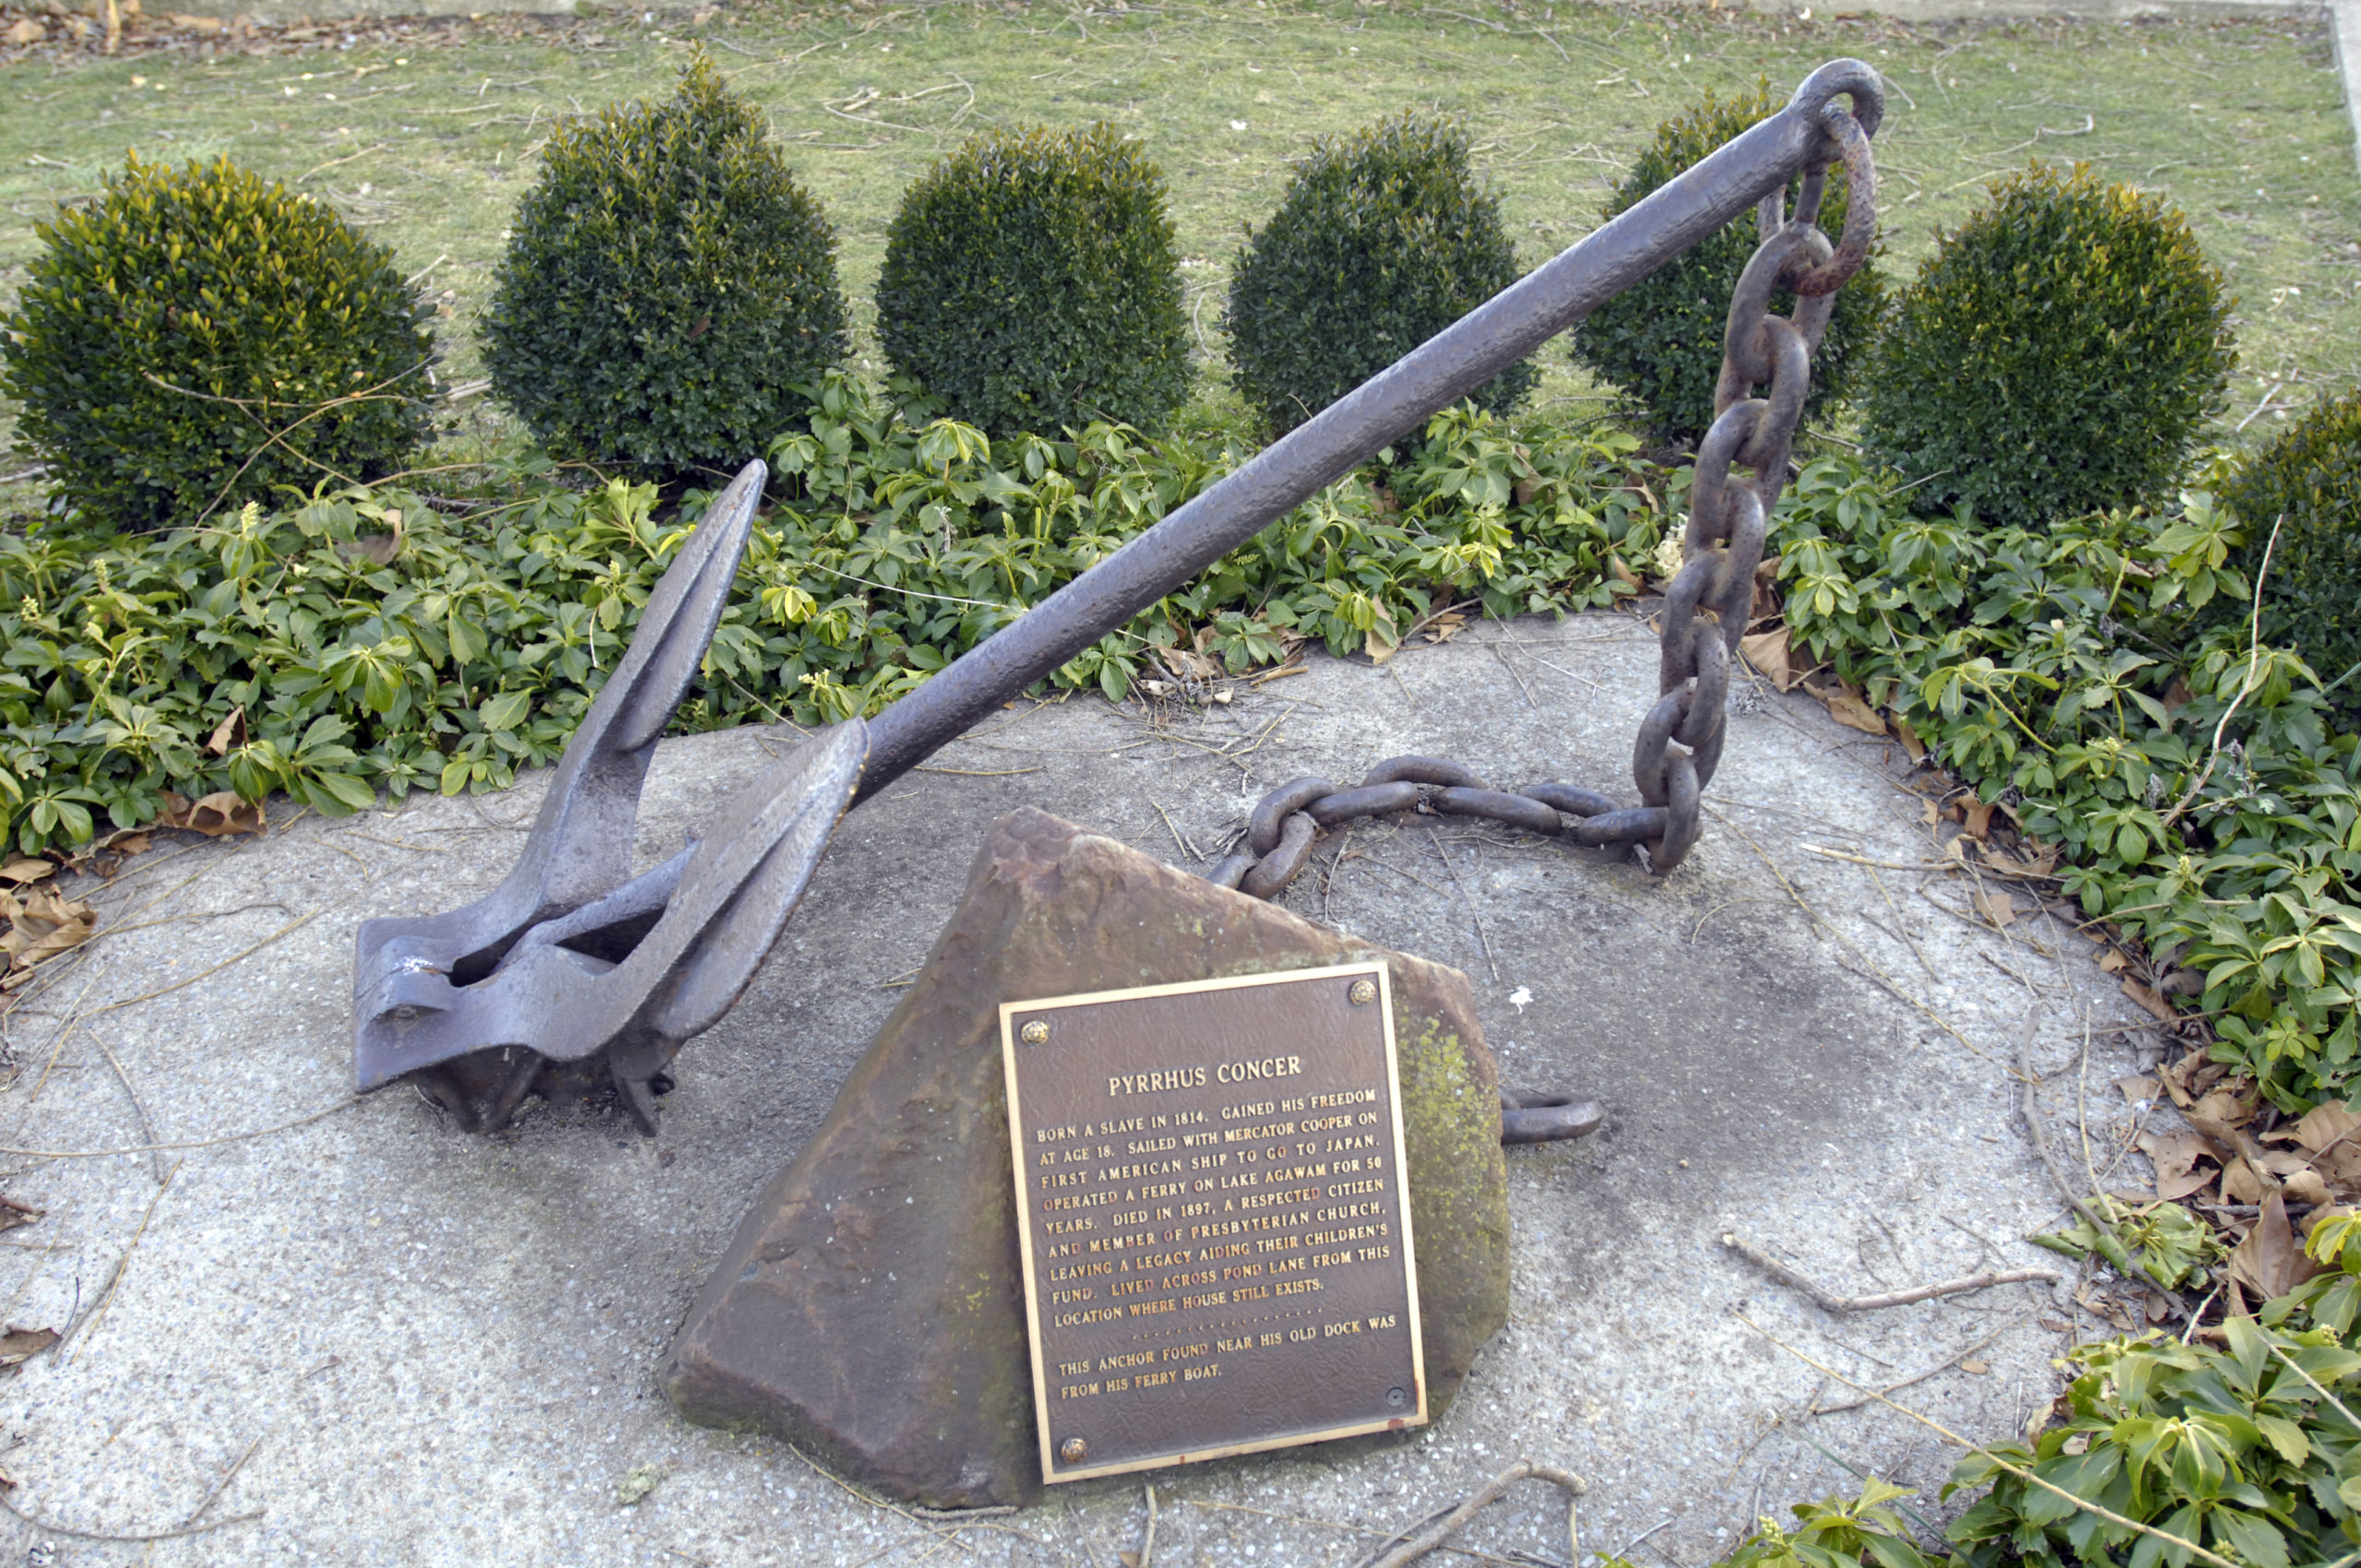 The plaque and anchor in Agawam Park commemorating Pyrrhus Concer.            PRESS FILE